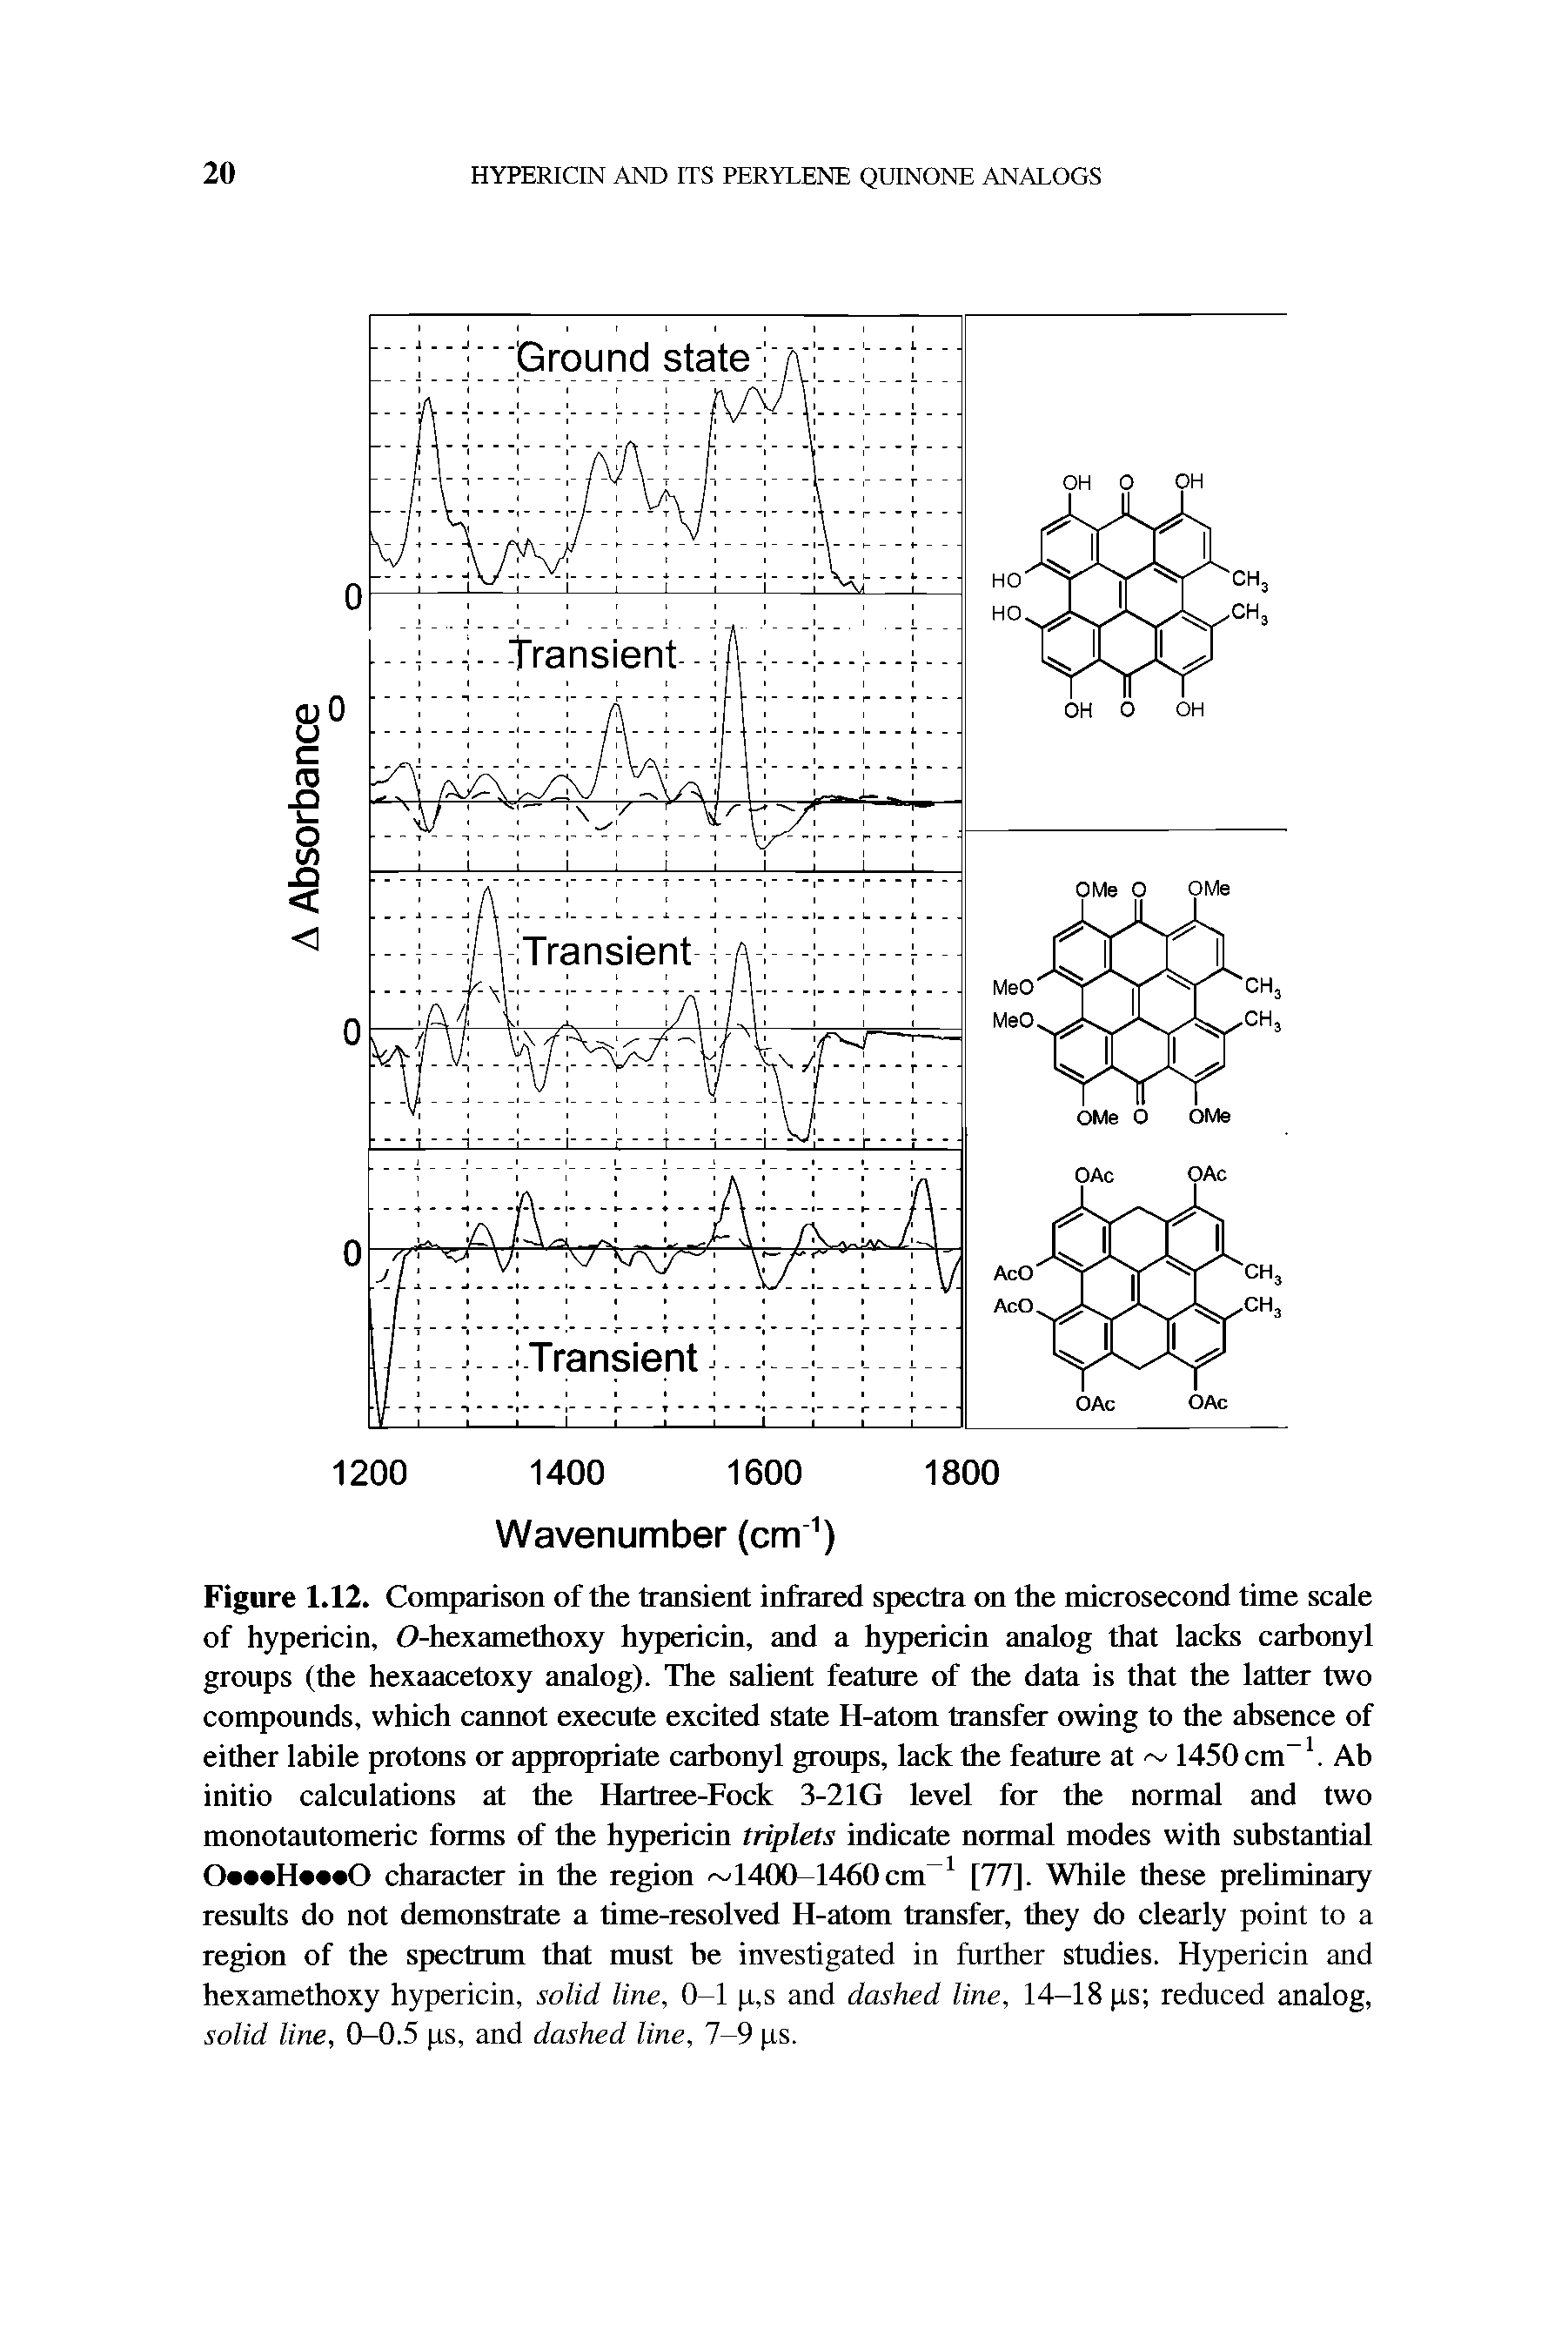 Figure 1.12. Comparison of the transient infrared spectra on the microsecond time scale of hypericin, O-hexamethoxy hypericin, and a hypericin analog that lacks carbonyl groups (the hexaacetoxy analog). The salient feature of the data is that the latter two compounds, which cannot execute excited state H-atom transfer owing to the absence of either labile protons or appropriate carbonyl groups, lack the feature at 1450 cm-1. Ab initio calculations at the Hartree-Fock 3-21G level for the normal and two monotautomeric forms of the hypericin triplets indicate normal modes with substantial character in the region 1400-1460 cm-1 [77]. While these preliminary results do not demonstrate a time-resolved H-atom transfer, they do clearly point to a region of the spectrum that must be investigated in further studies. Hypericin and hexamethoxy hypericin, solid line, 0-1 p,s and dashed line, 14-18 ps reduced analog, solid line, 0-0.5 ps, and dashed line, 7-9 ps.